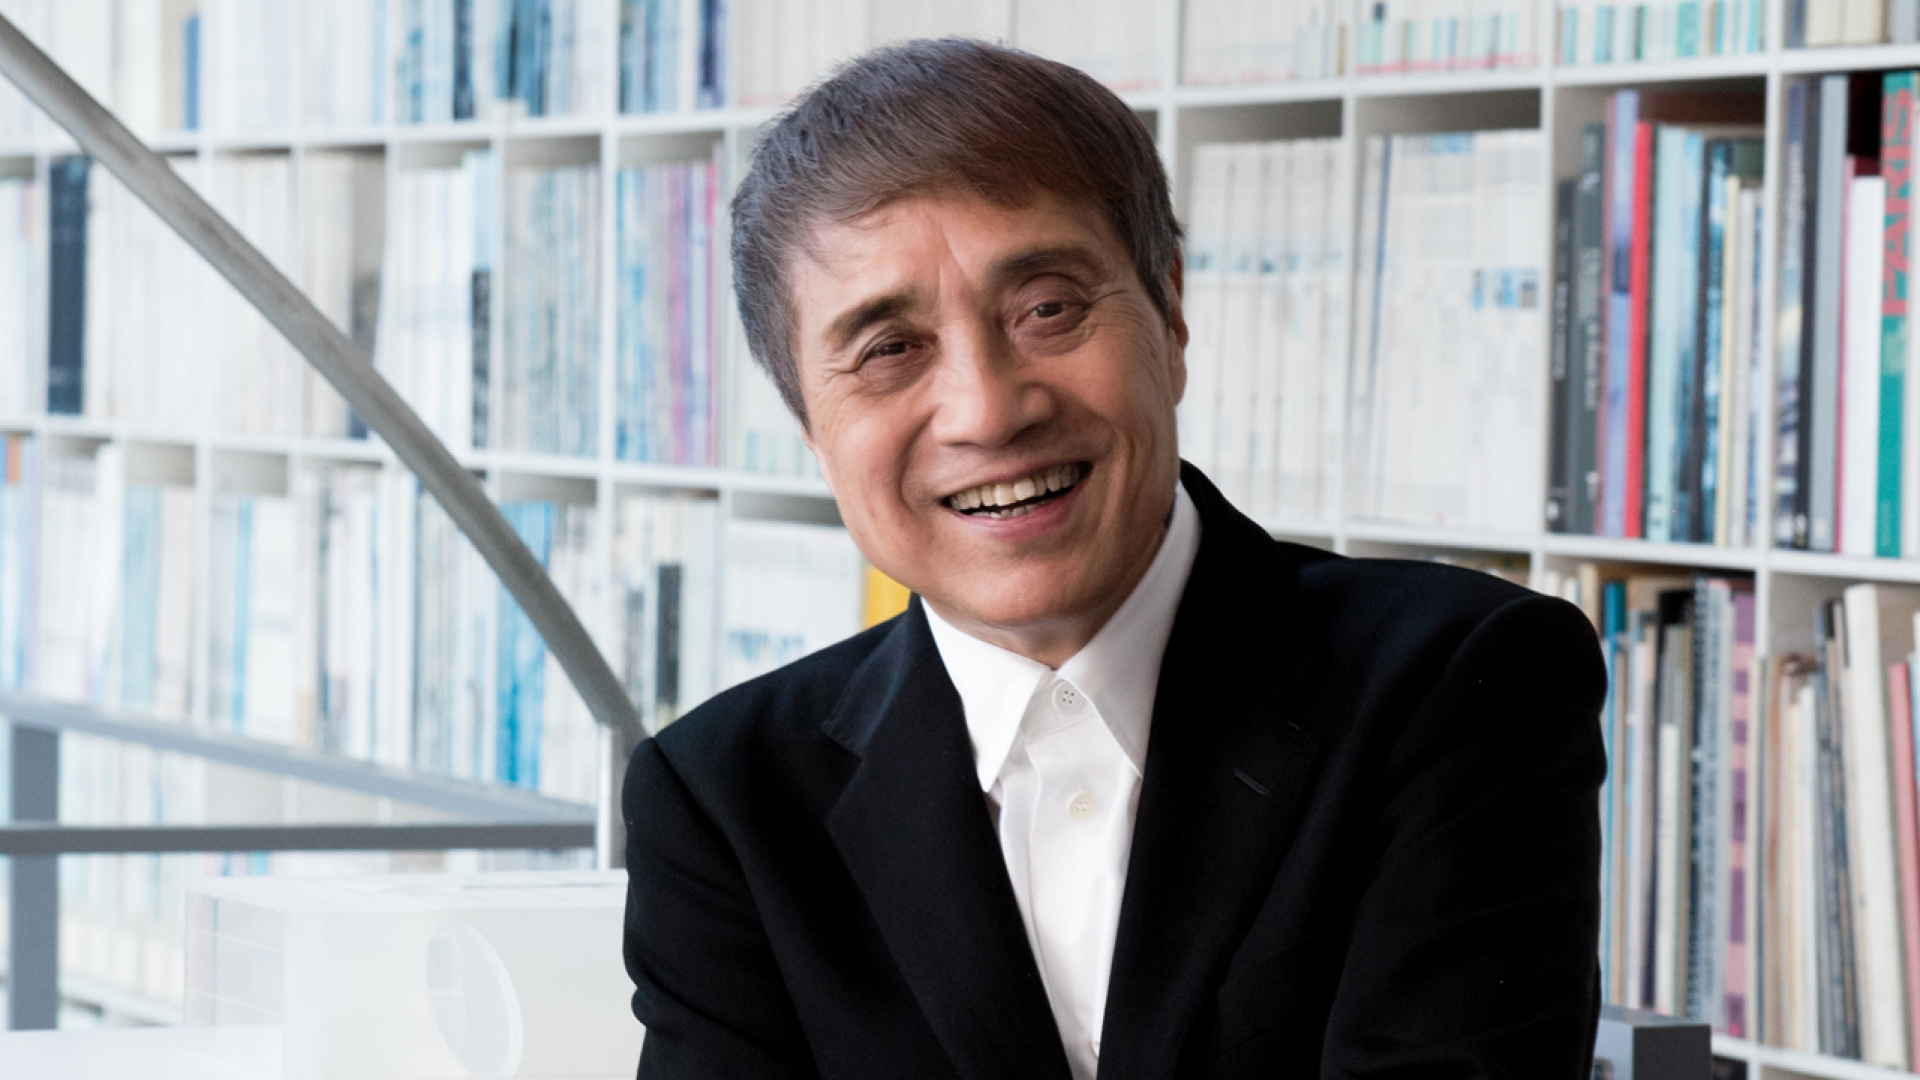 Tadao Ando, Pritzker Prize-Winning Architect, Selected for 10th MPavilion